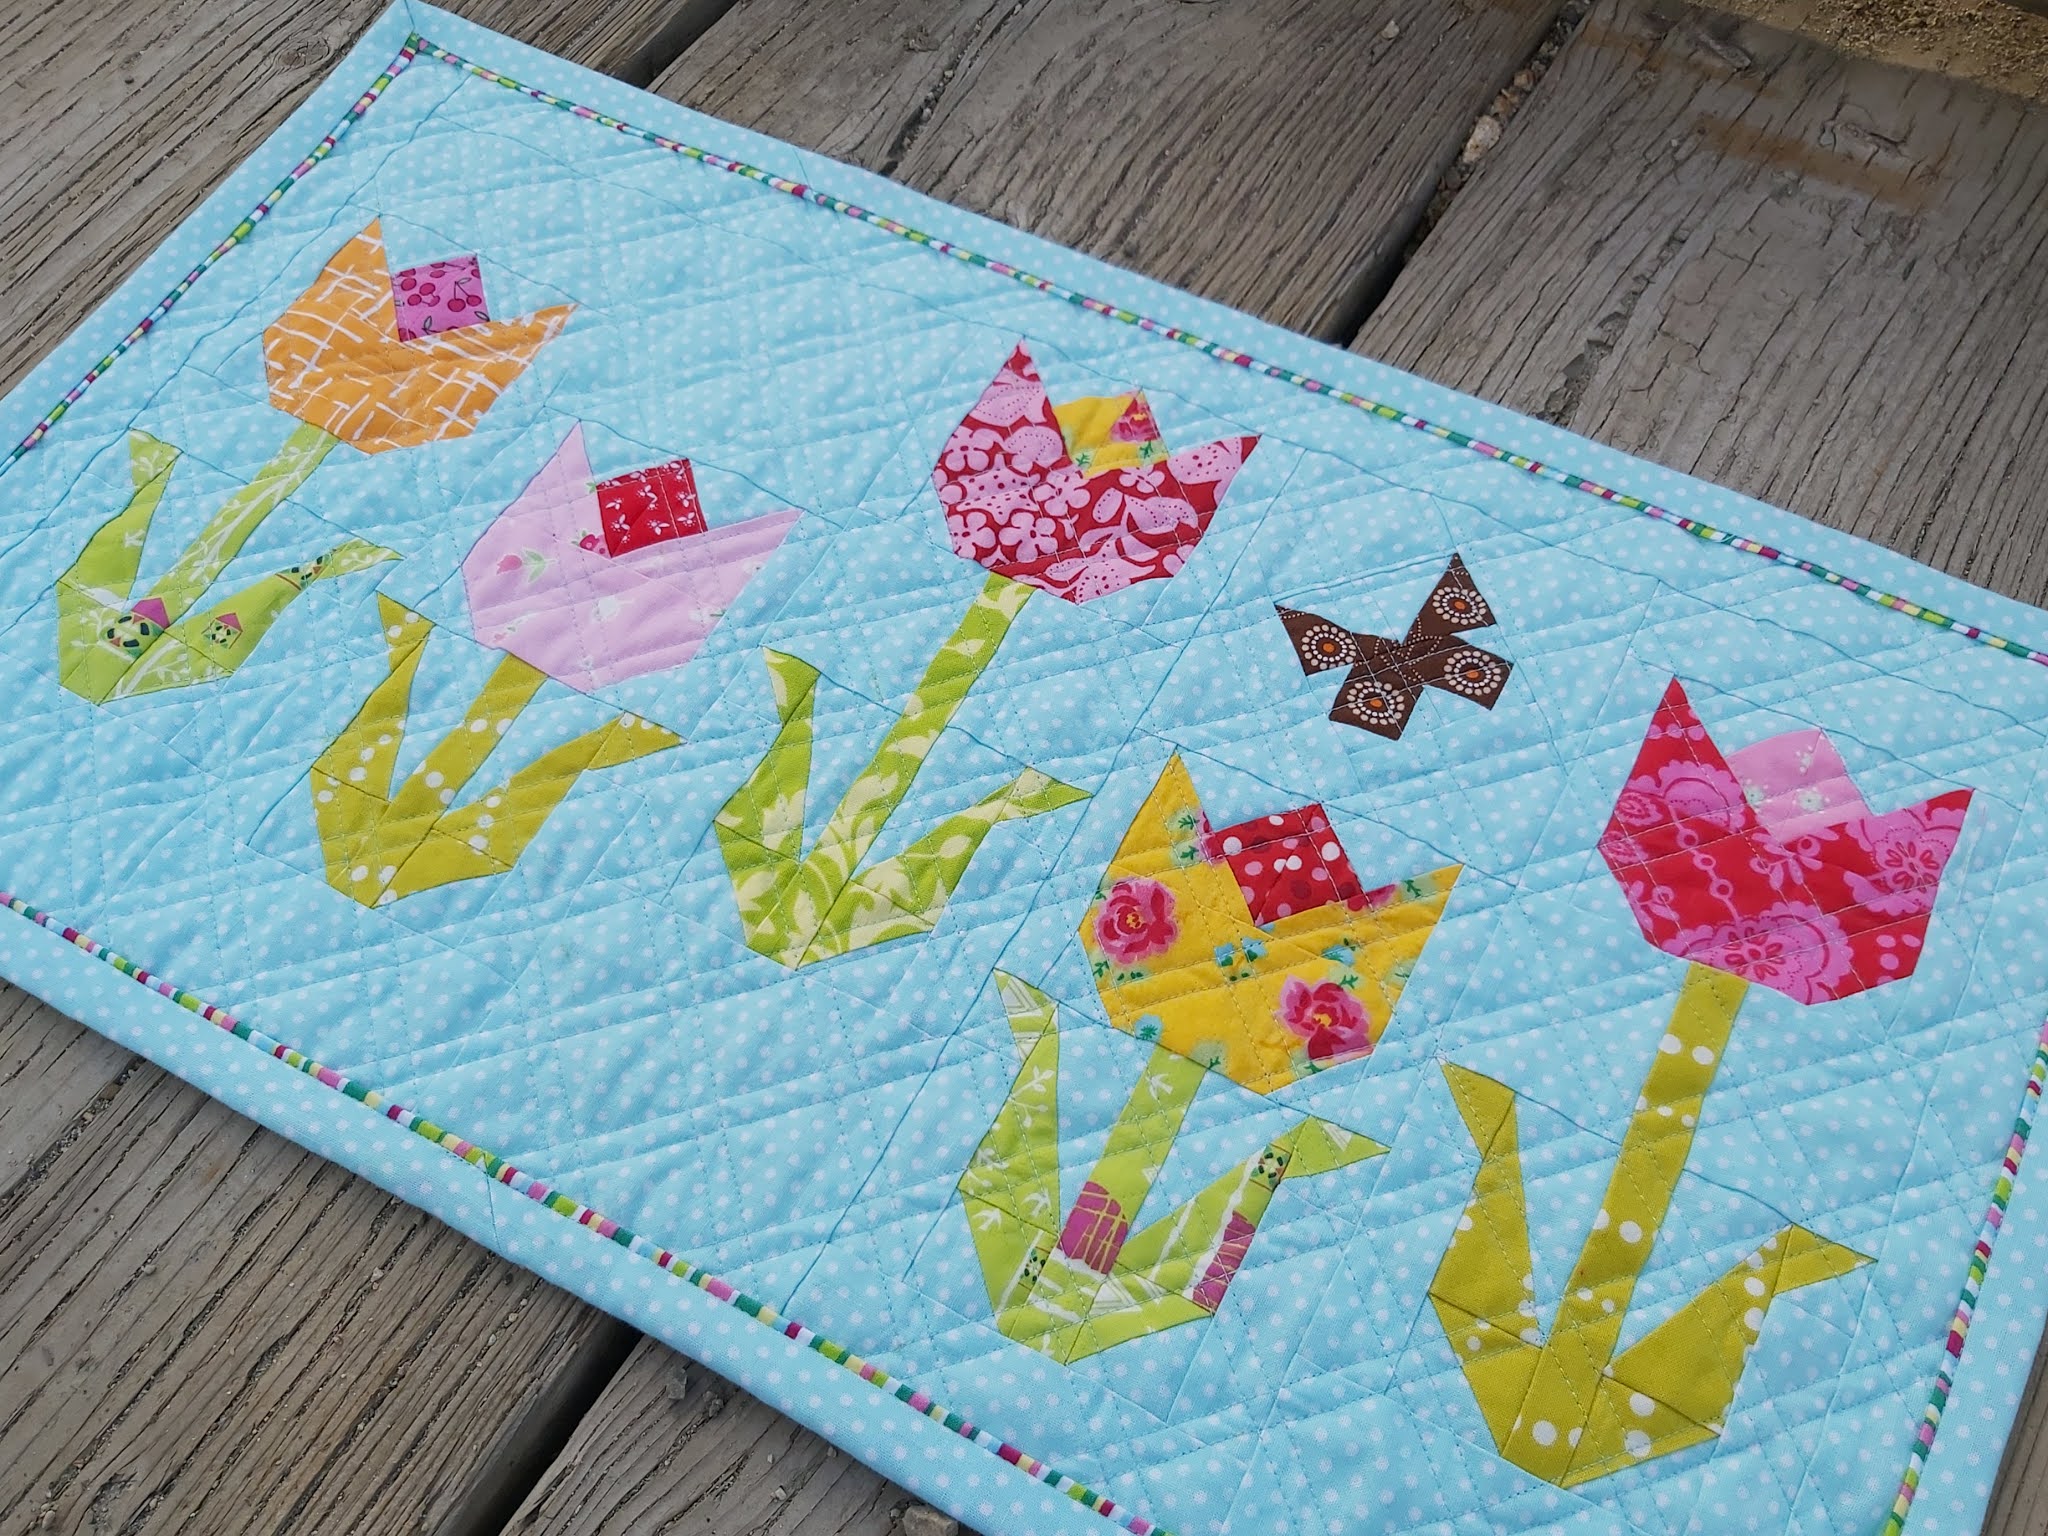 Sewing gadgets we can't live without - Tulip Square ~ Patterns for useful  quilted goods